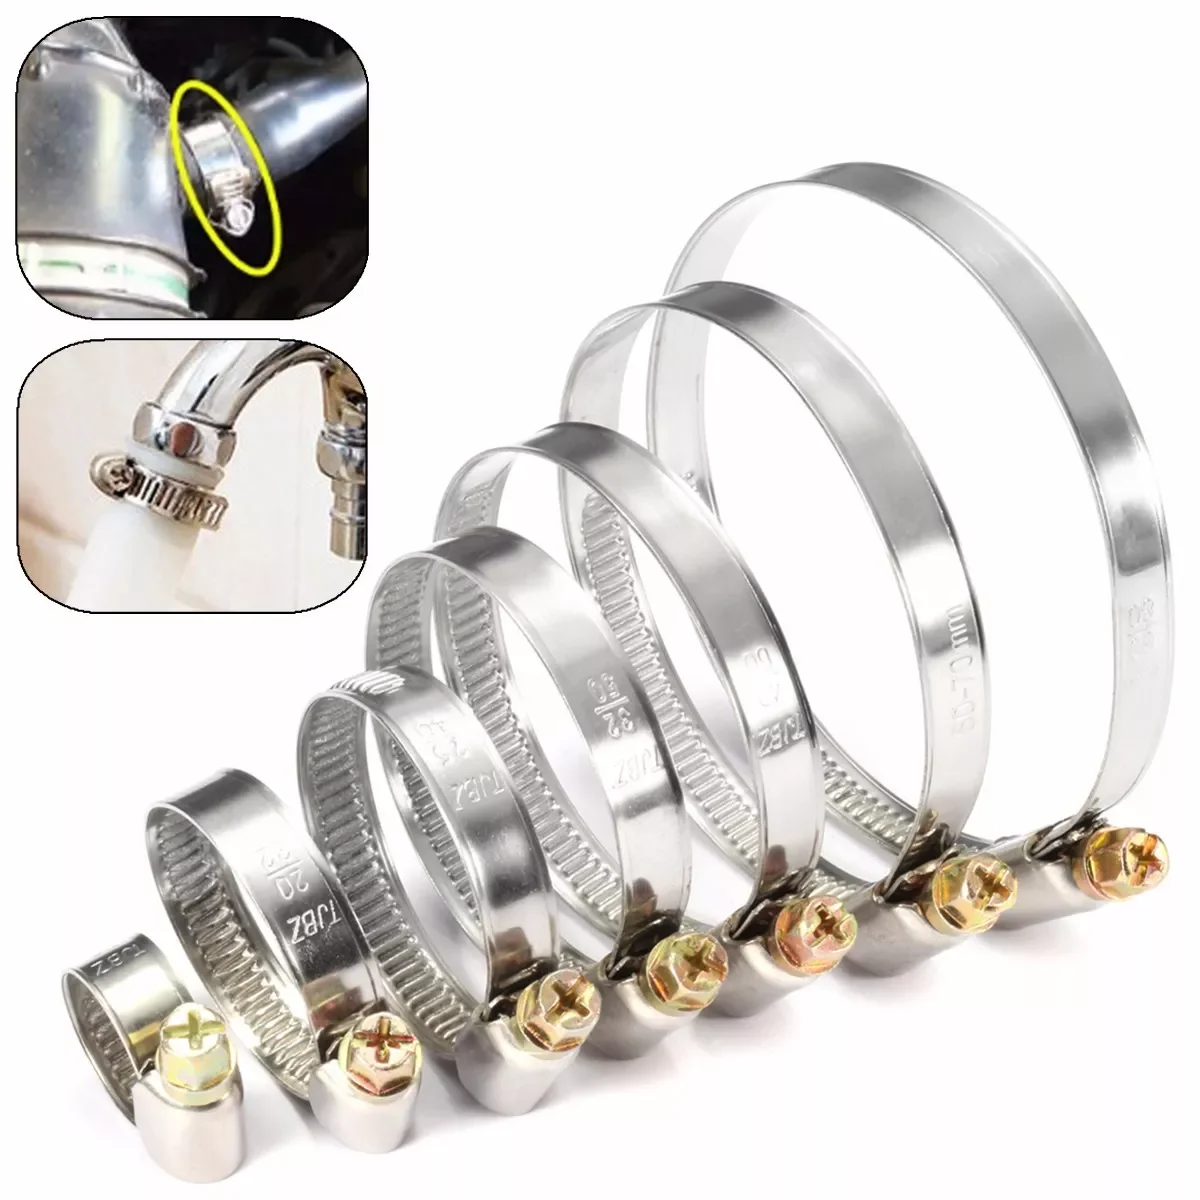 

5pcs Pipe Clamps Genuine Jubilee Stainless Steel Hose Clips Car Fuel Hose Pipe Clamps Worm Drive Durable Anti-oxidation